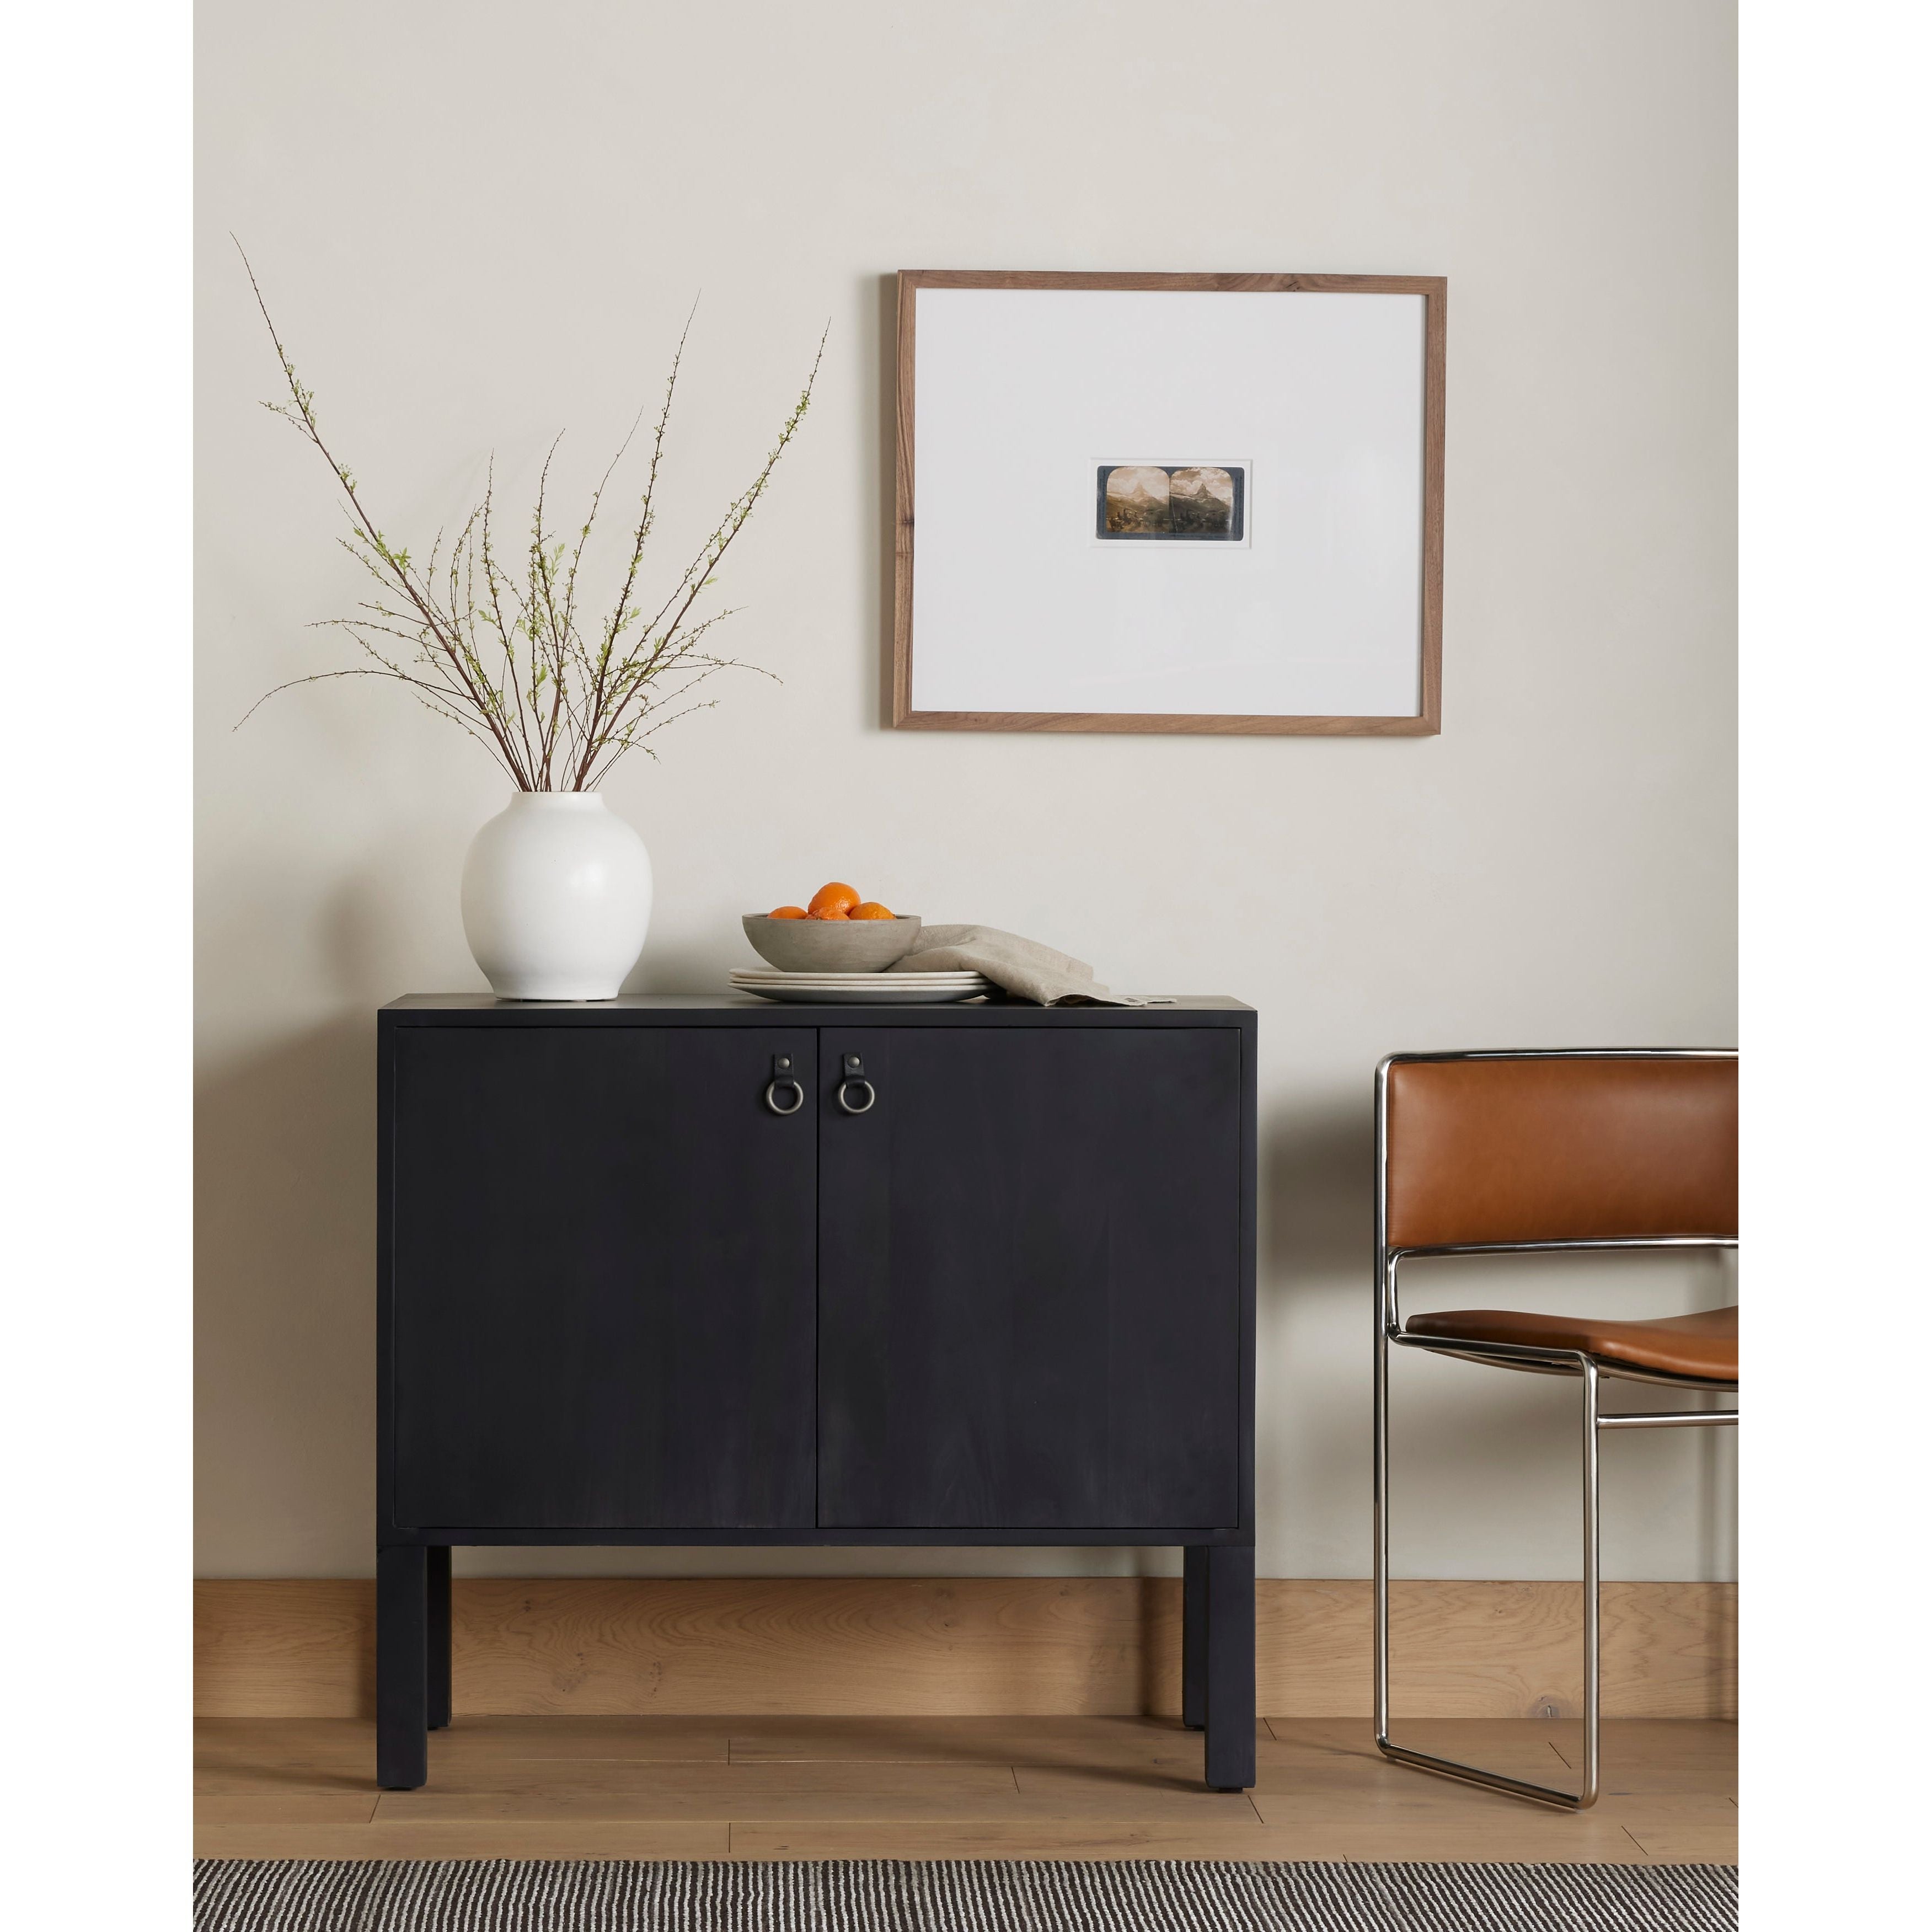 Beautifully simple in spirit. Black-washed solid poplar forms a Parsons-style bar cabinet, with iron and leather hardware for a material-driven update to Shaker-inspired styling. Inside, dual drawers plus generous bottle storage await drink go-tos and bar accessories. Amethyst Home provides interior design, new construction, custom furniture, and area rugs in the Boston metro area.